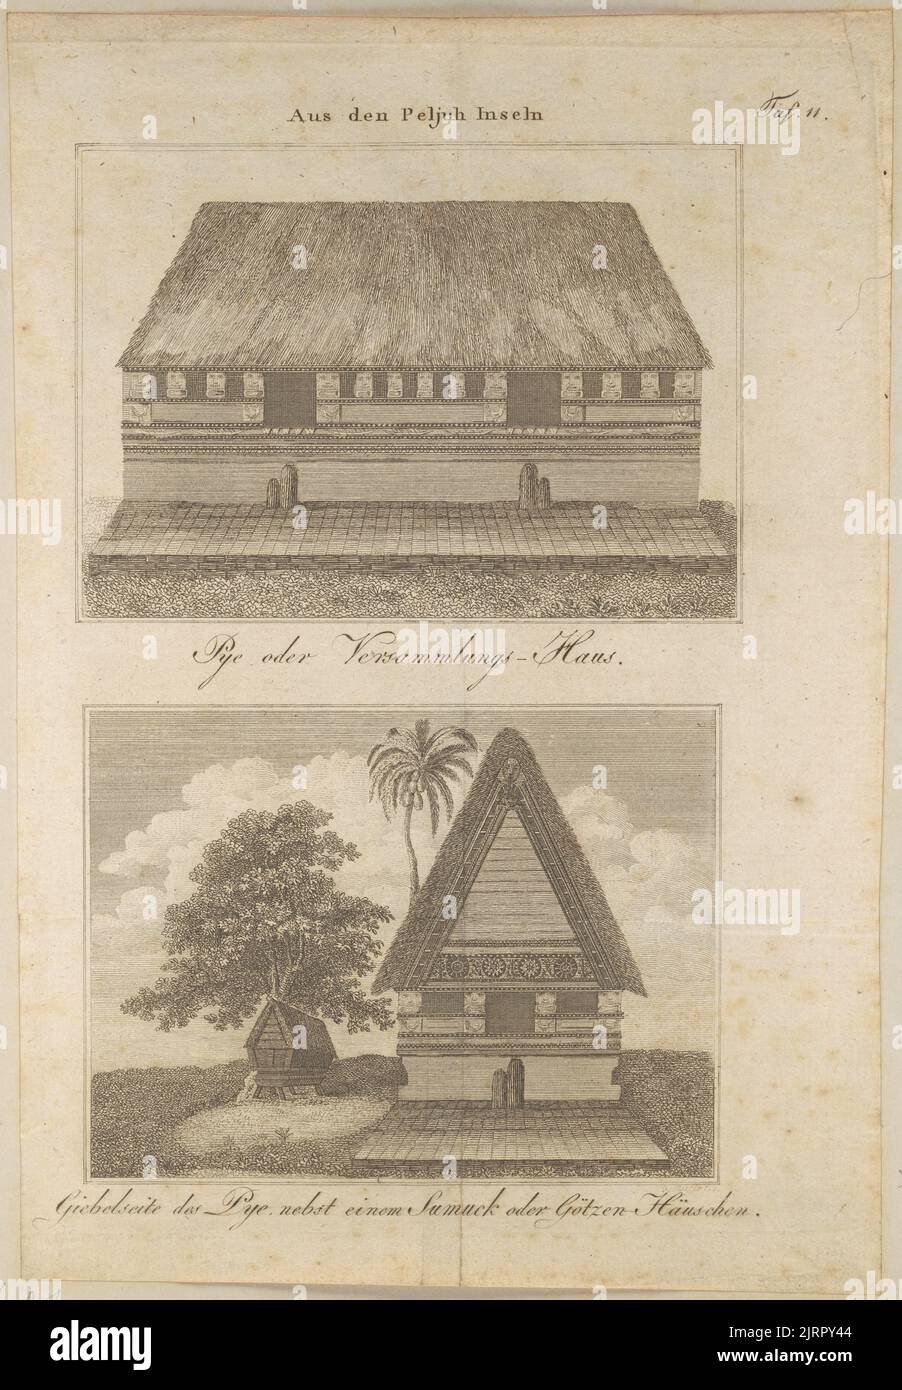 Storehouse, Tombhouse and Templehouse: Pelew Islands, 1816, Prague, by William Wilson. Acquisition history unknown. Stock Photo